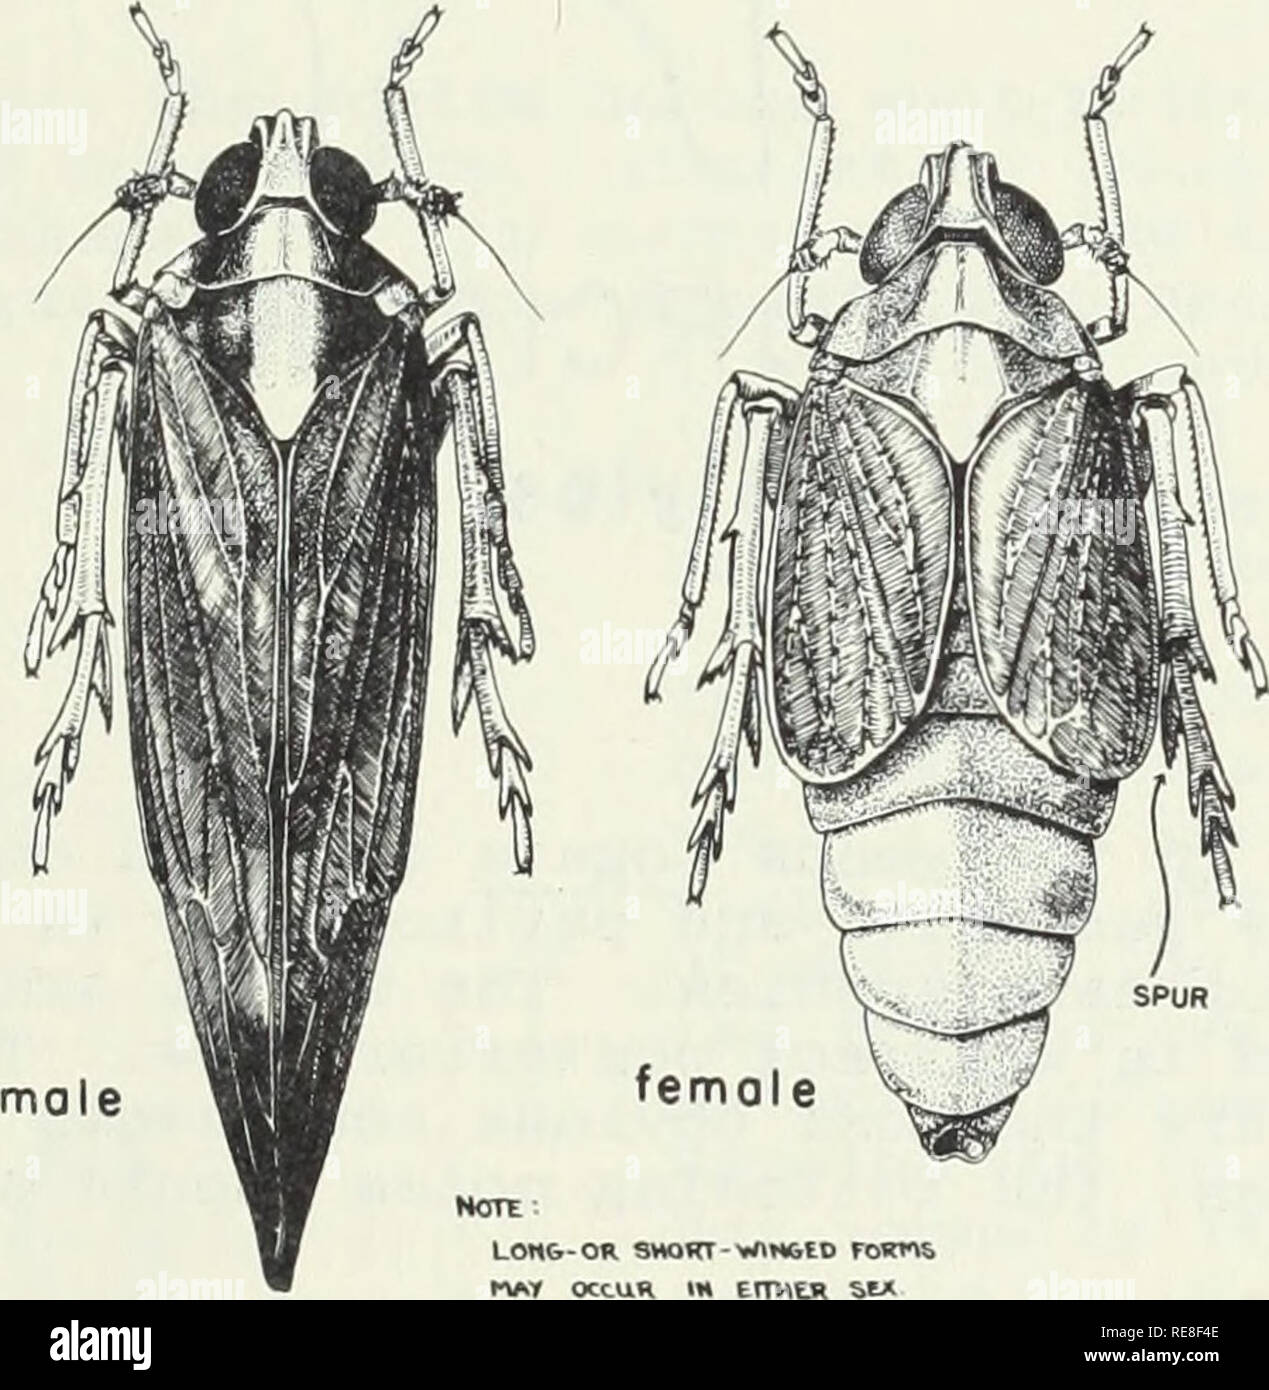 . Cooperative economic insect report. Insect pests Control United States Periodicals. - 973 - The Rice Delphacid, Sogata orizicola Muir, and Two Closely Related Species (Homoptera: Fulgoroidea: Delphacidae) The rice delphacid, Sogata orizicola Muir, is, as far as known, the sole vector of a virus disease of rice which has been called &quot;hoja blanca&quot;. This disease was first observed in the Western Hemisphere about 1954, and in the United States in September, 1957, at Belle Glade, Florida. An additional infection was found in September, 1958, at Bay Saint Louis, Mississippi. The disease  Stock Photo